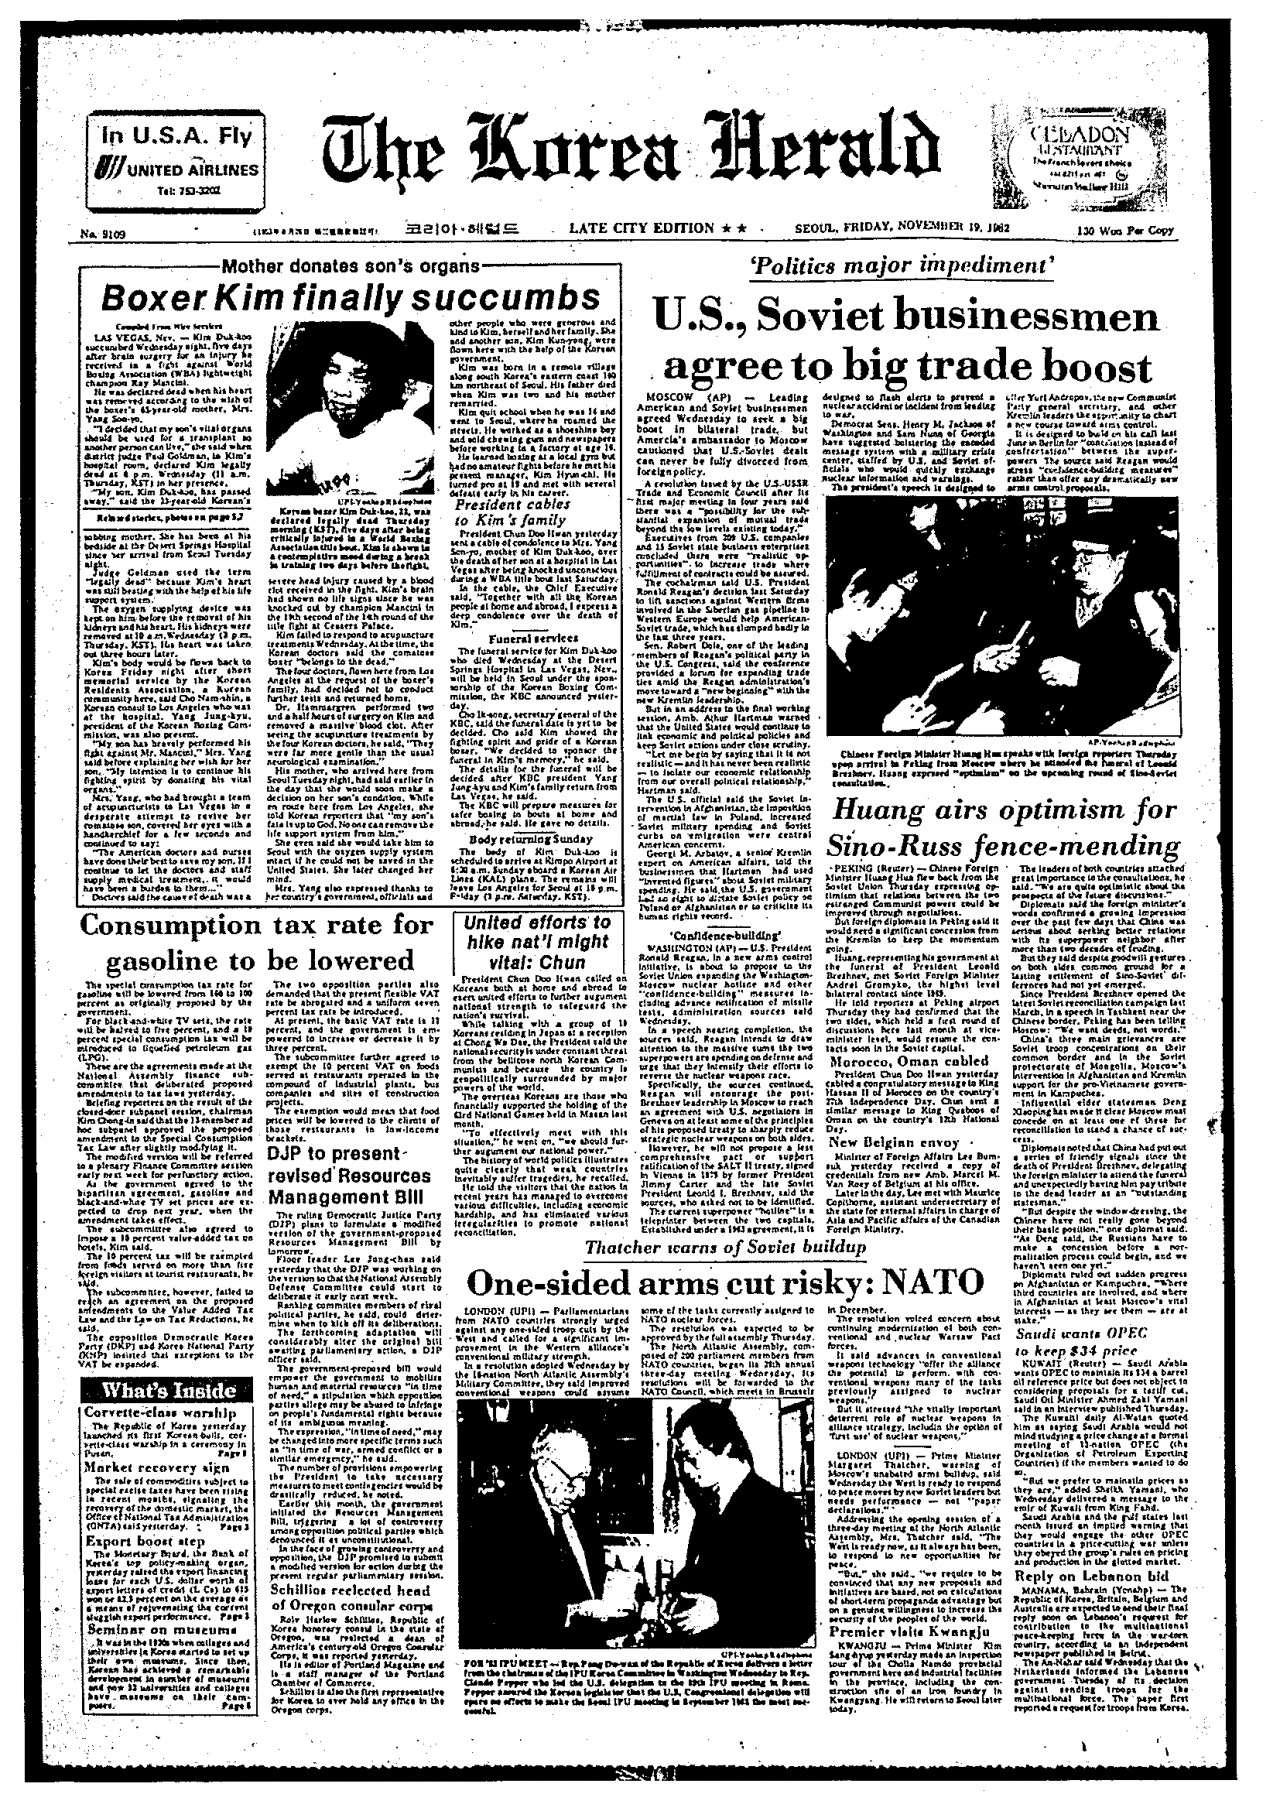 The Nov. 19, 1982 edition of The Korea Herald carries the story of how South Korea boxer Kim Duk-goo died after suffering a fatal injury in a fight against Ray Mancini in Las Vegas. (The Korea Herald)